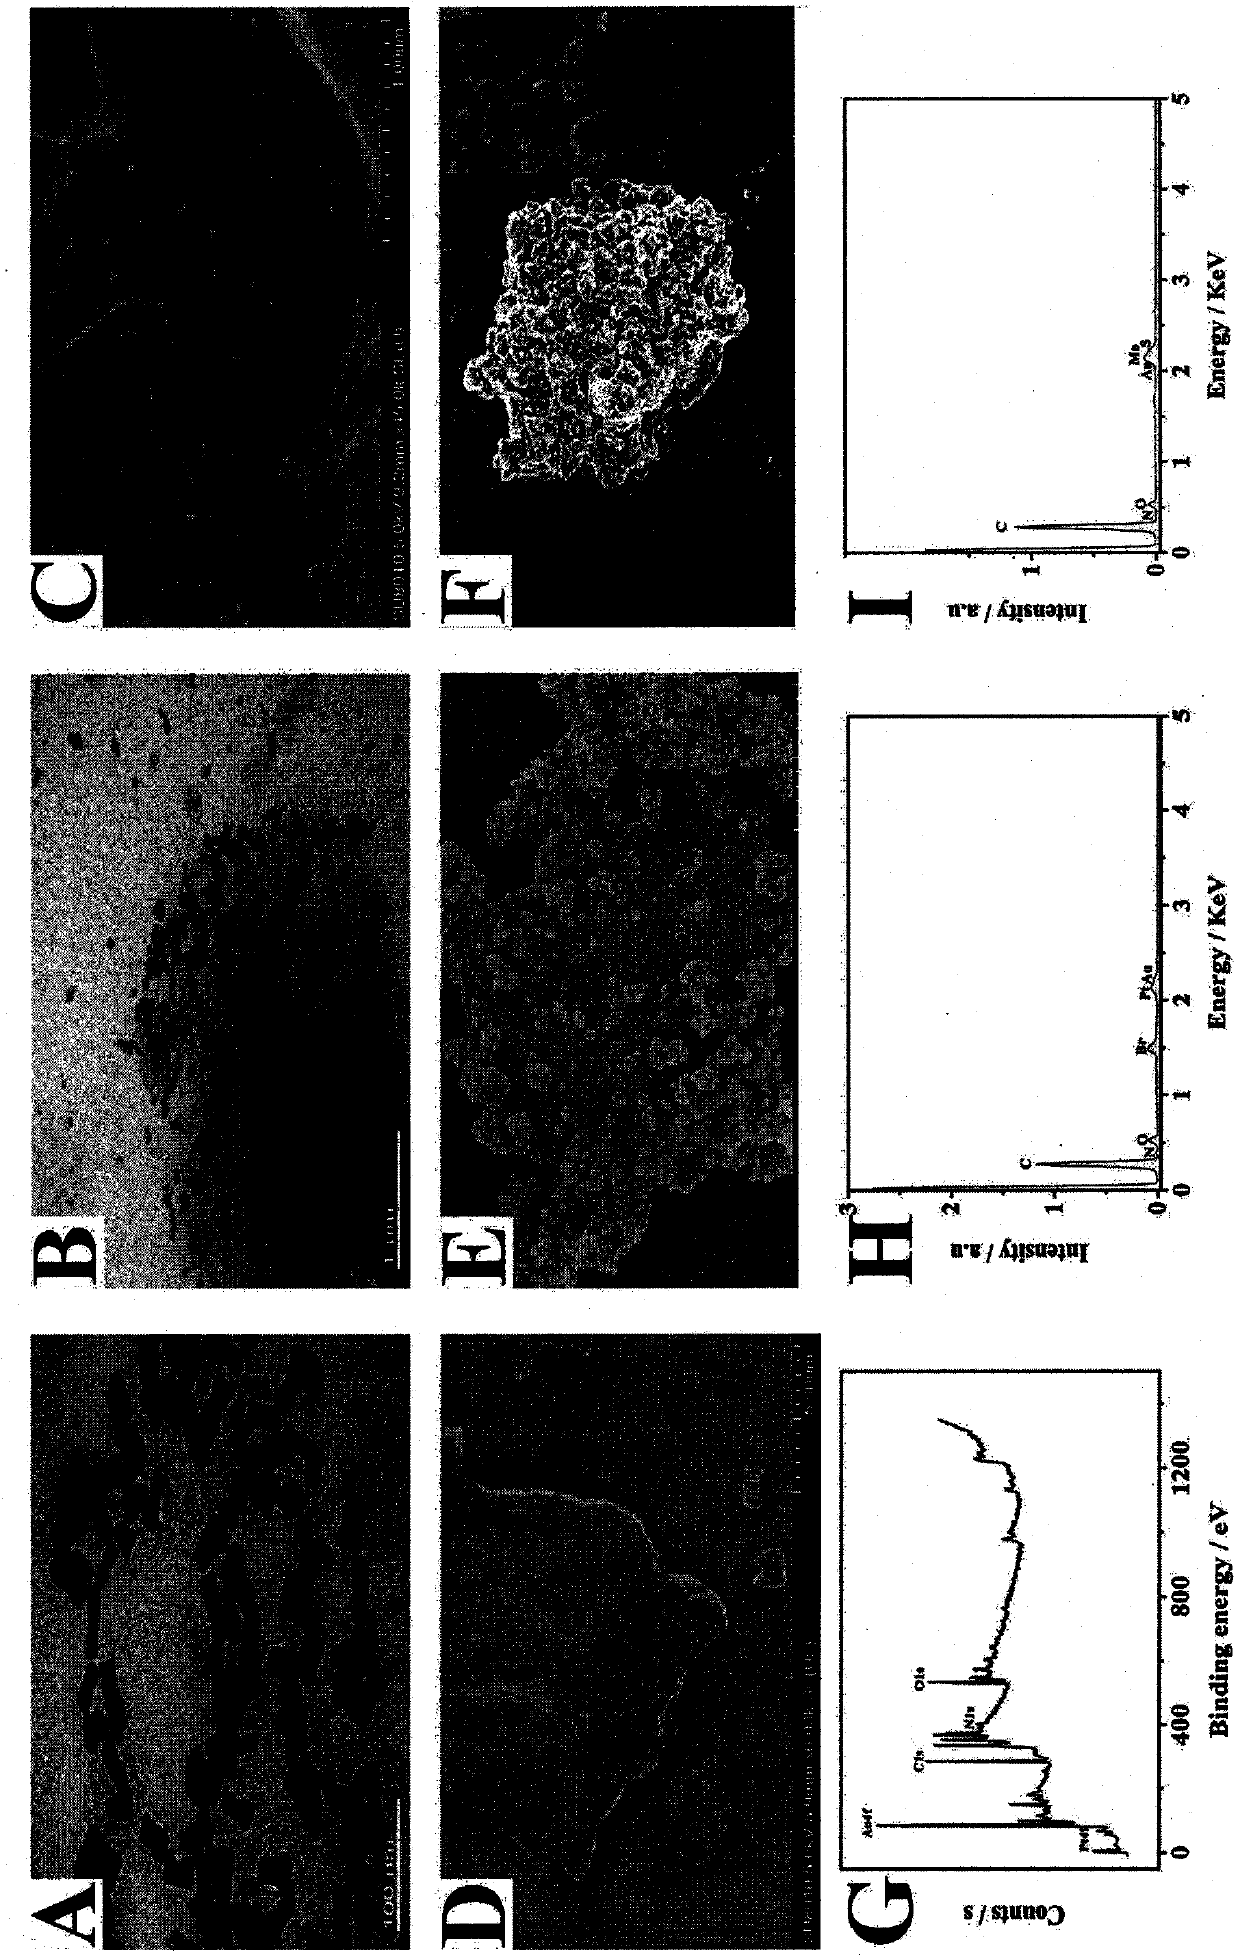 Preparation method for aptamer biosensor for T-2 toxin detection in food or feed